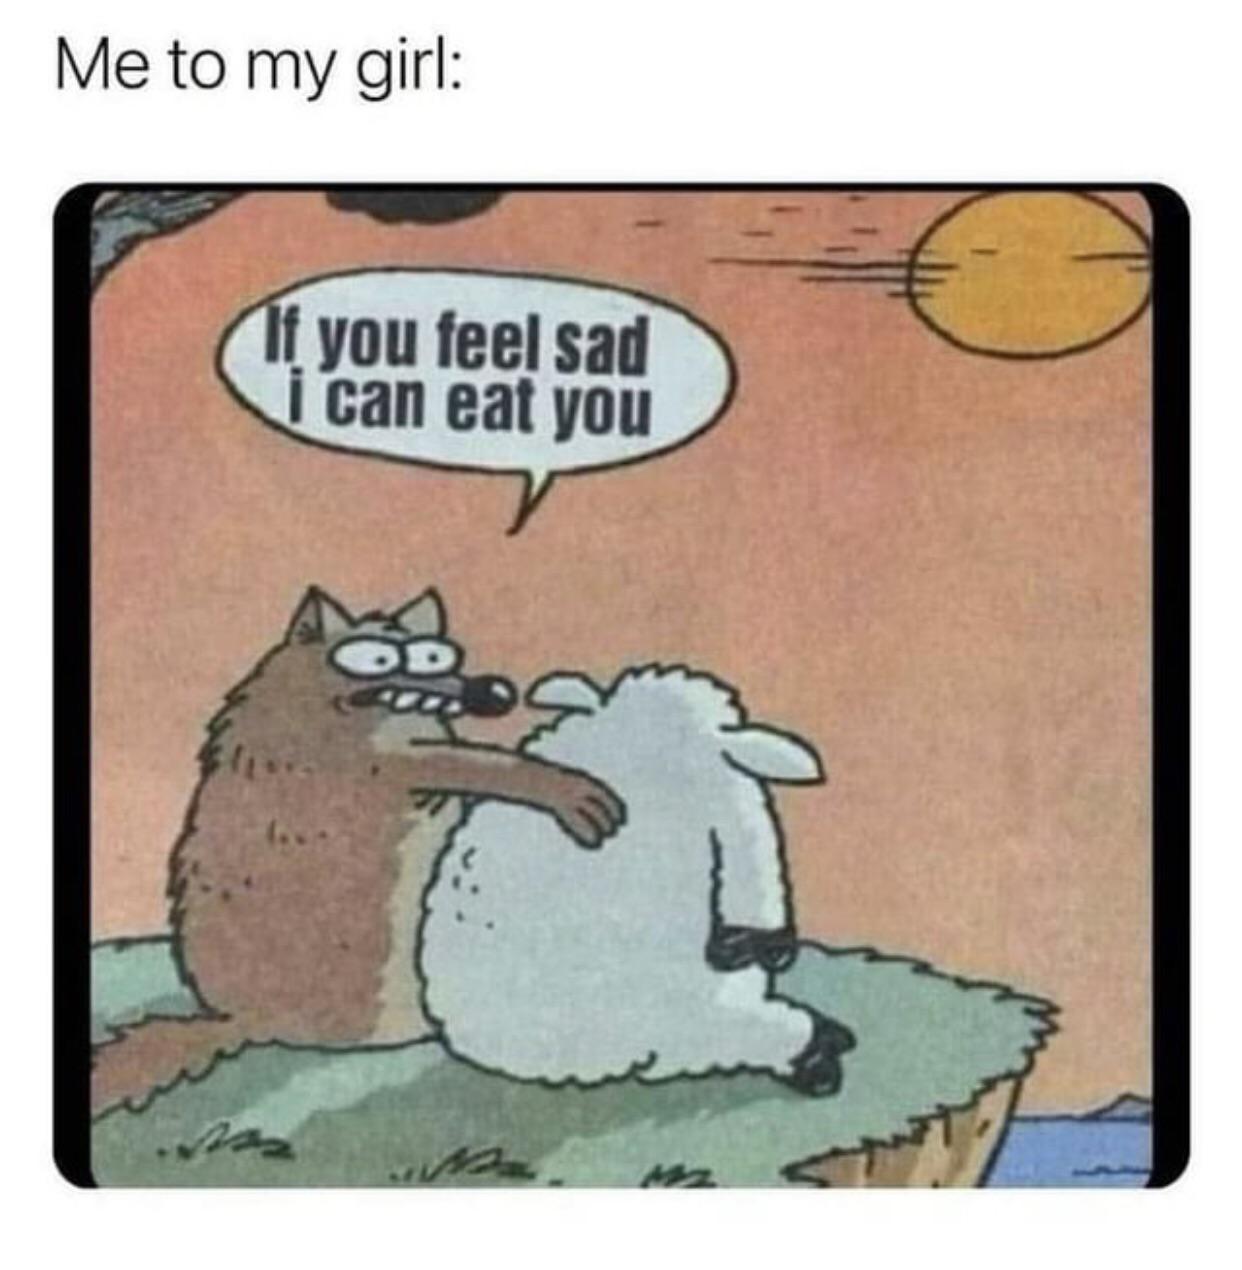 spicy sex memes - if you feel sad i can eat you facebook - Me to my girl If you feel sad i can eat you